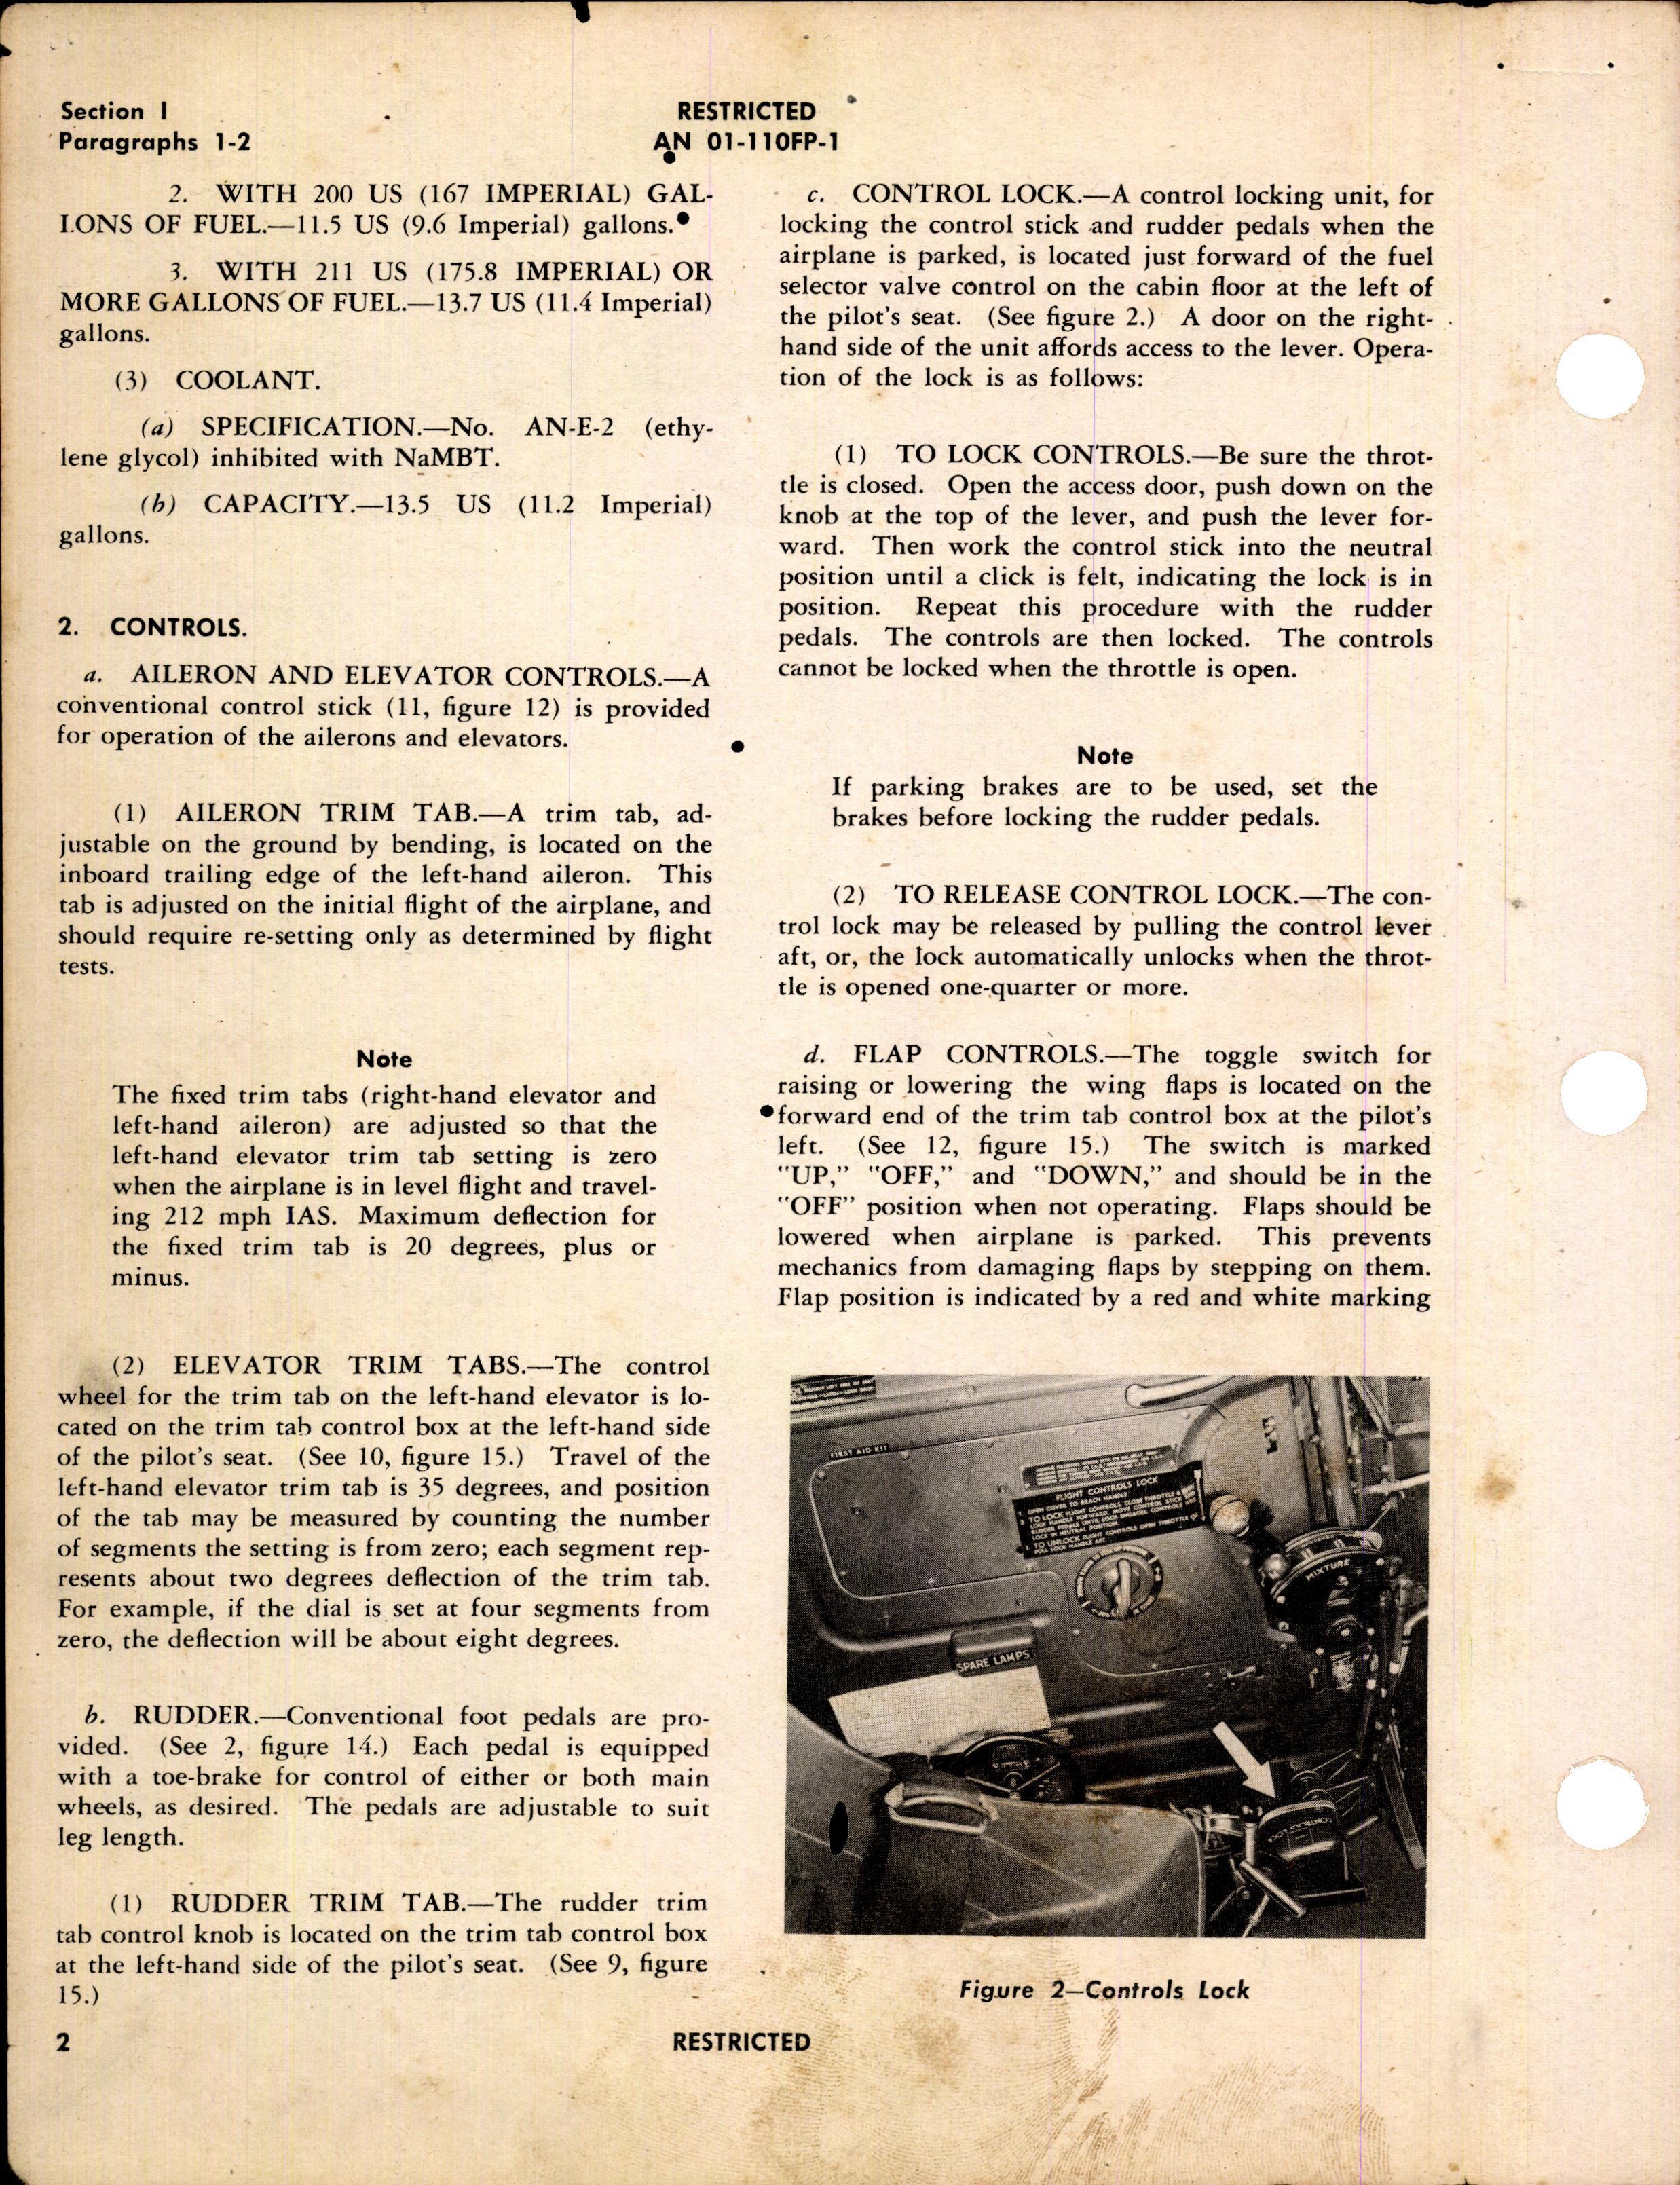 Sample page 6 from AirCorps Library document: Pilot's Handbook for RP-63G-1